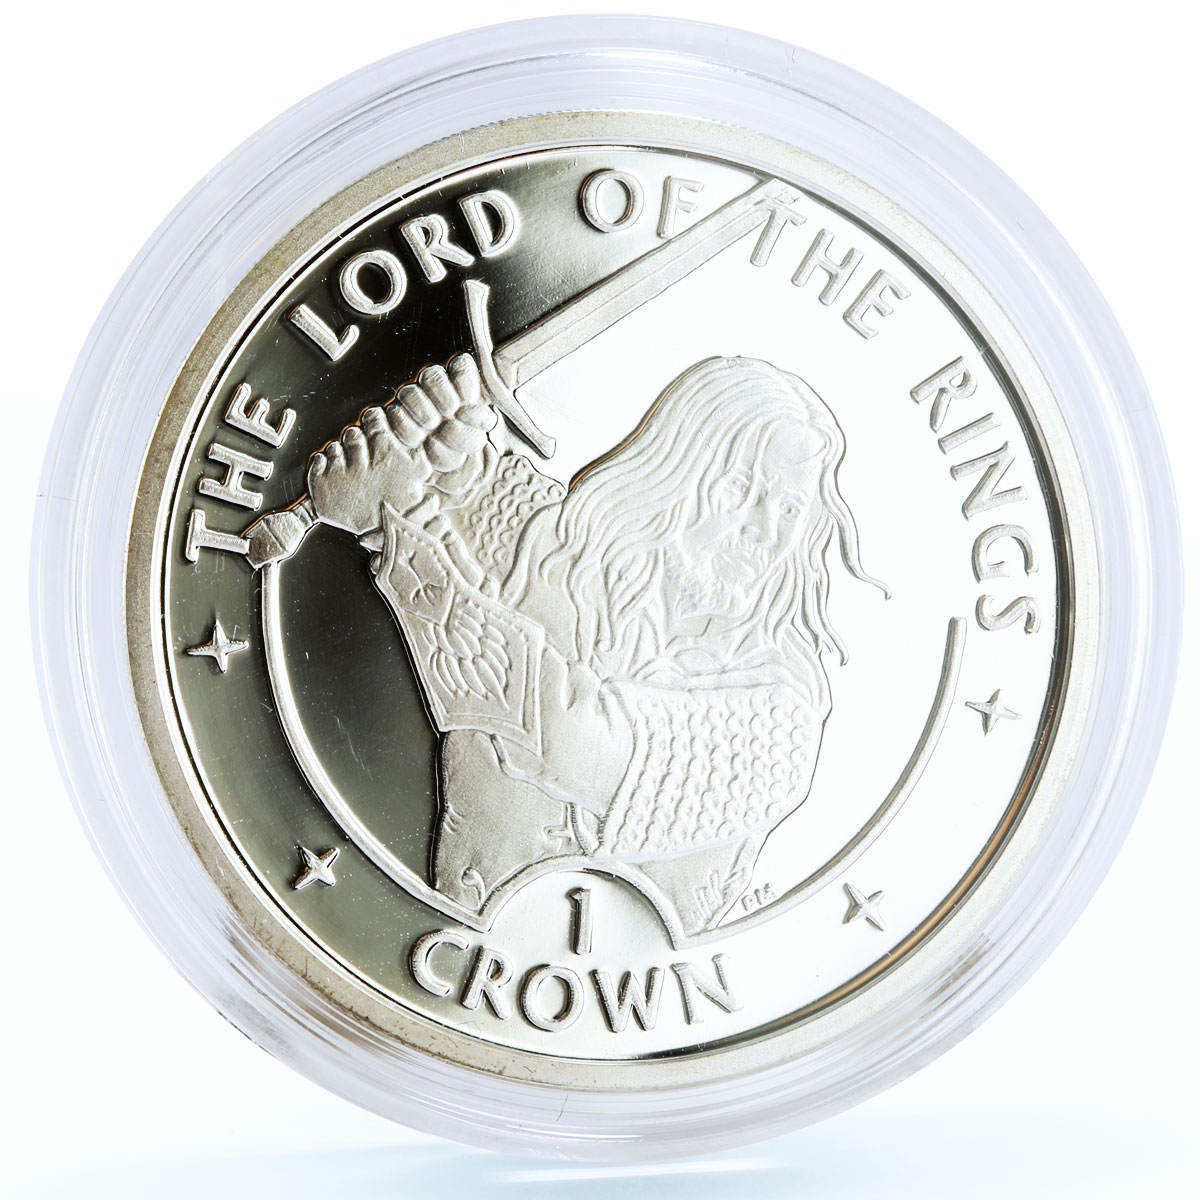 Isle of Man 1 crown Lord of the Rings King Aragorn proof silver coin 2003